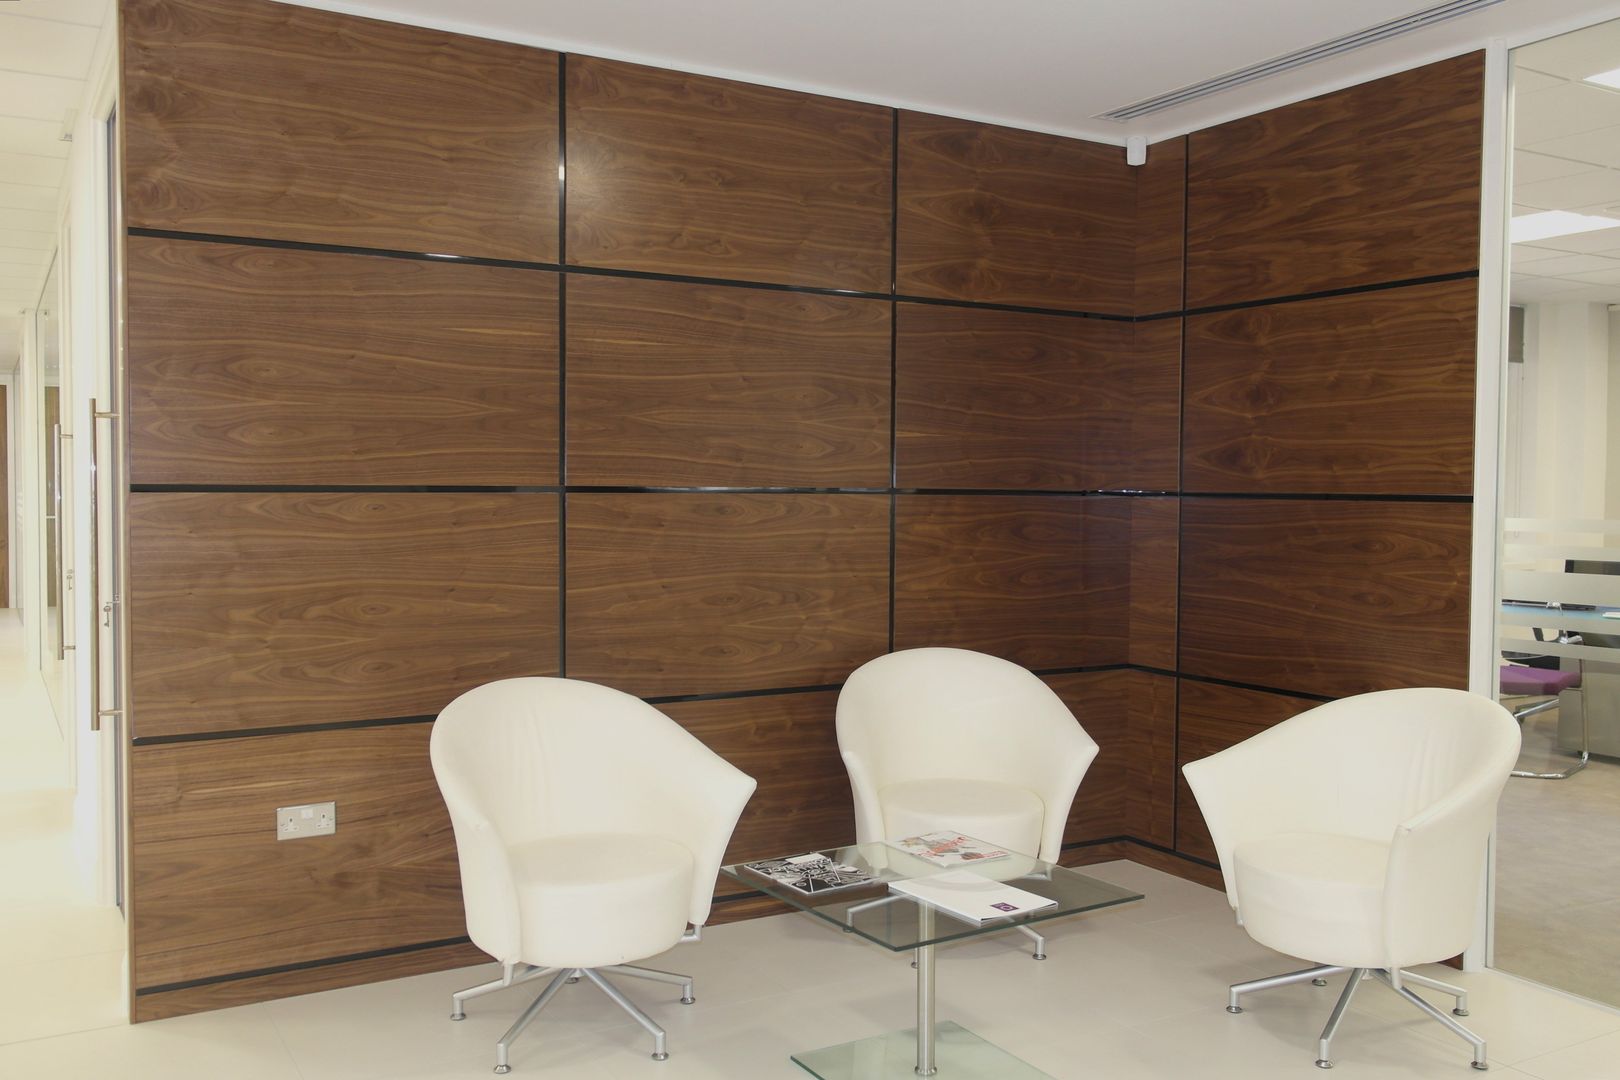 Walnut Artizo Wall Panels With Black Gloss Moulding The Wall Panelling Company Moderne Arbeitszimmer